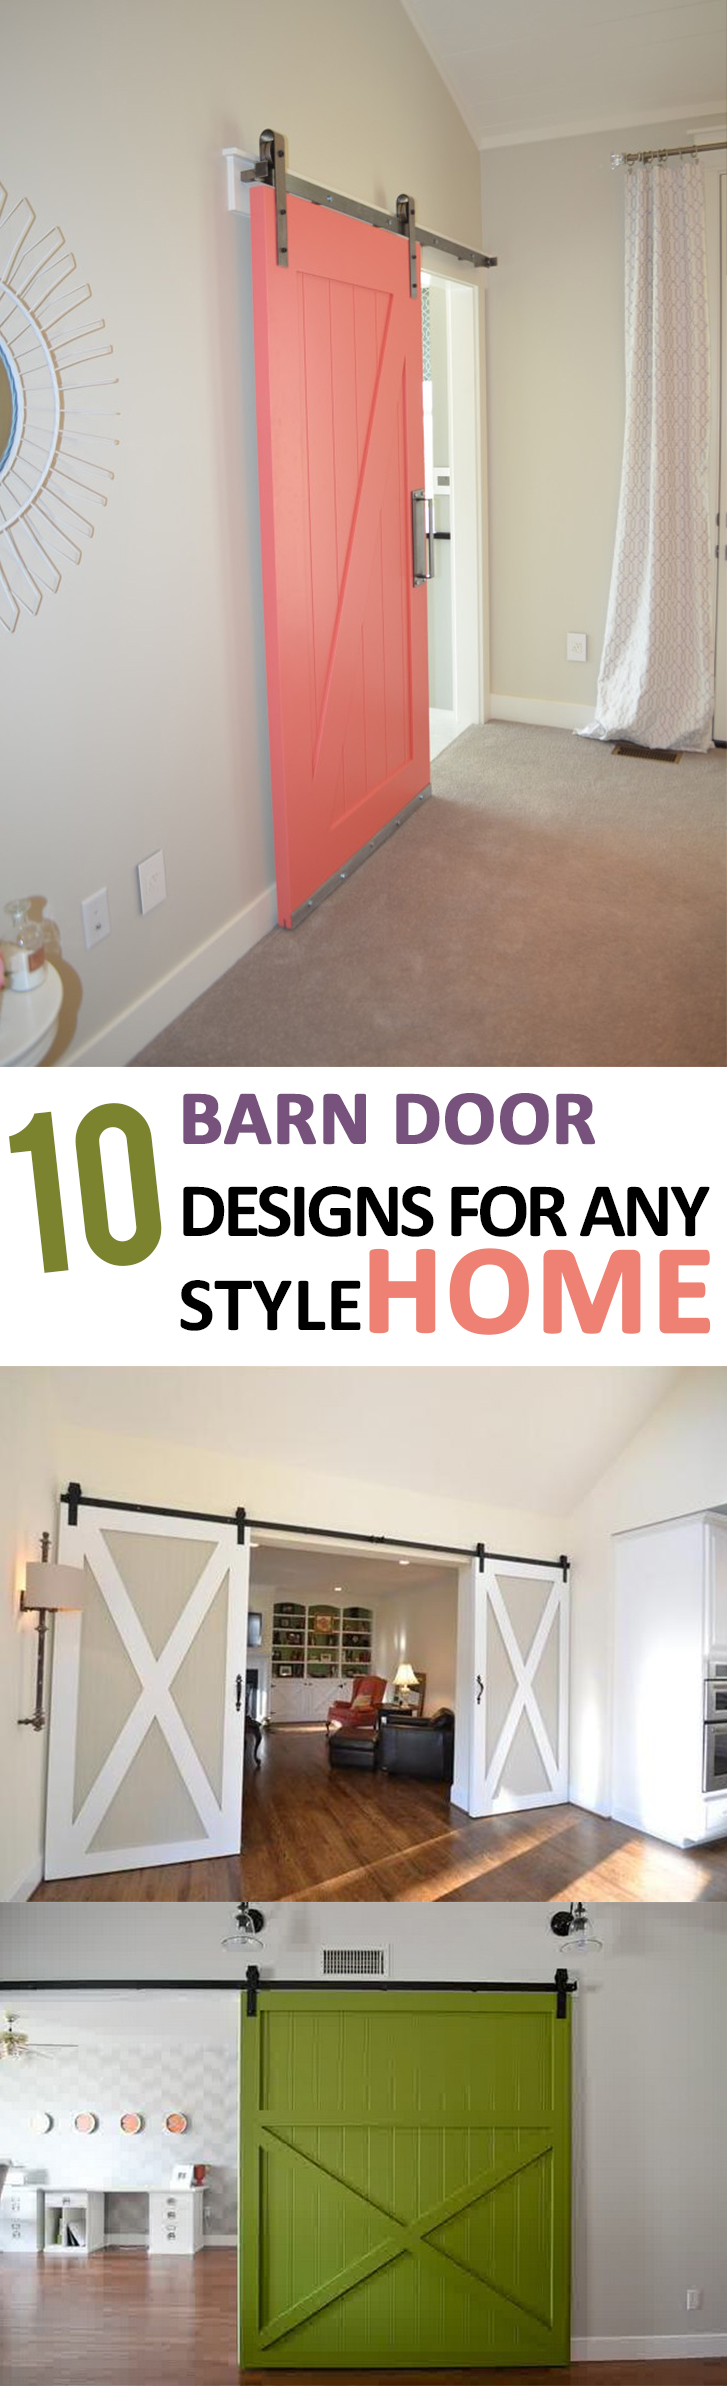 10 Barn Door Designs For Any Style Home